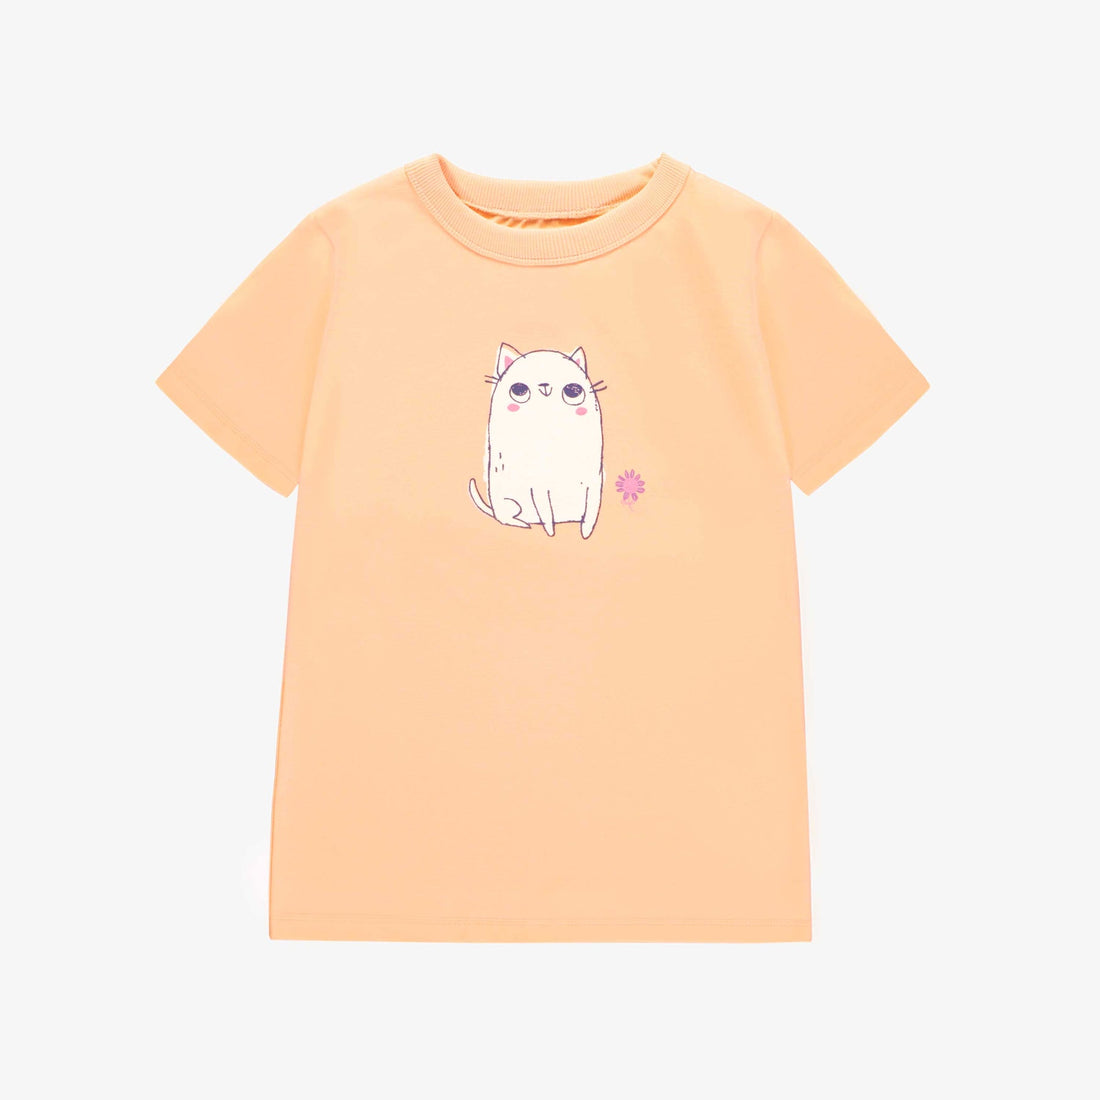 PEACH SHORT SLEEVES SLIM FIT T-SHIRT WITH PRINT, CHILD